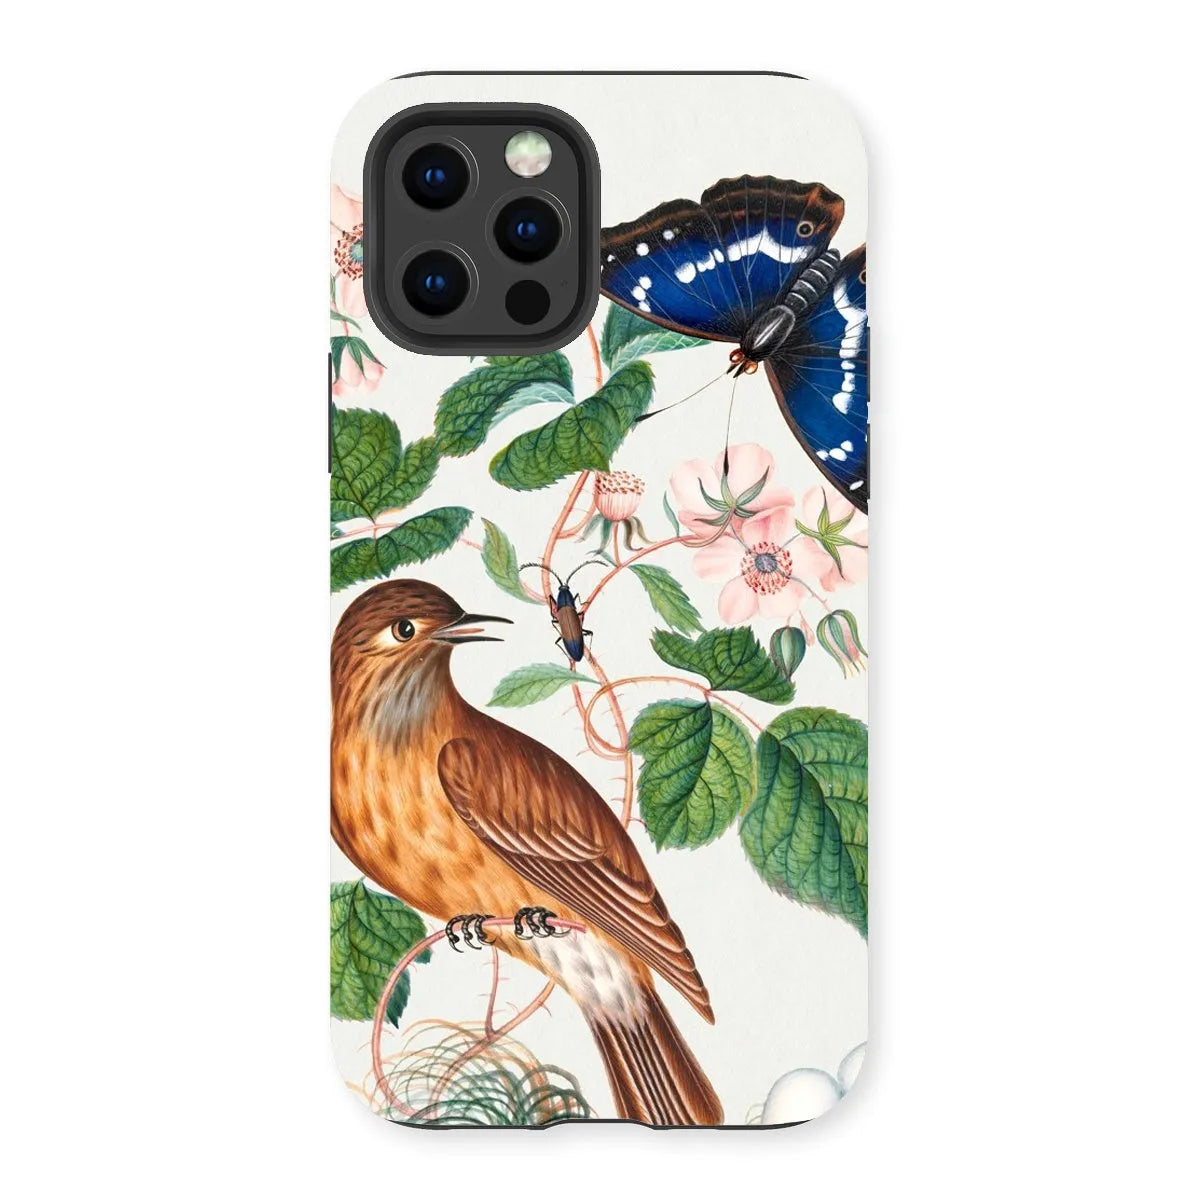 Flycatcher Emperor And Beetle - Art Phone Case - James Bolton - Iphone 13 Pro / Matte - Mobile Phone Cases - Aesthetic